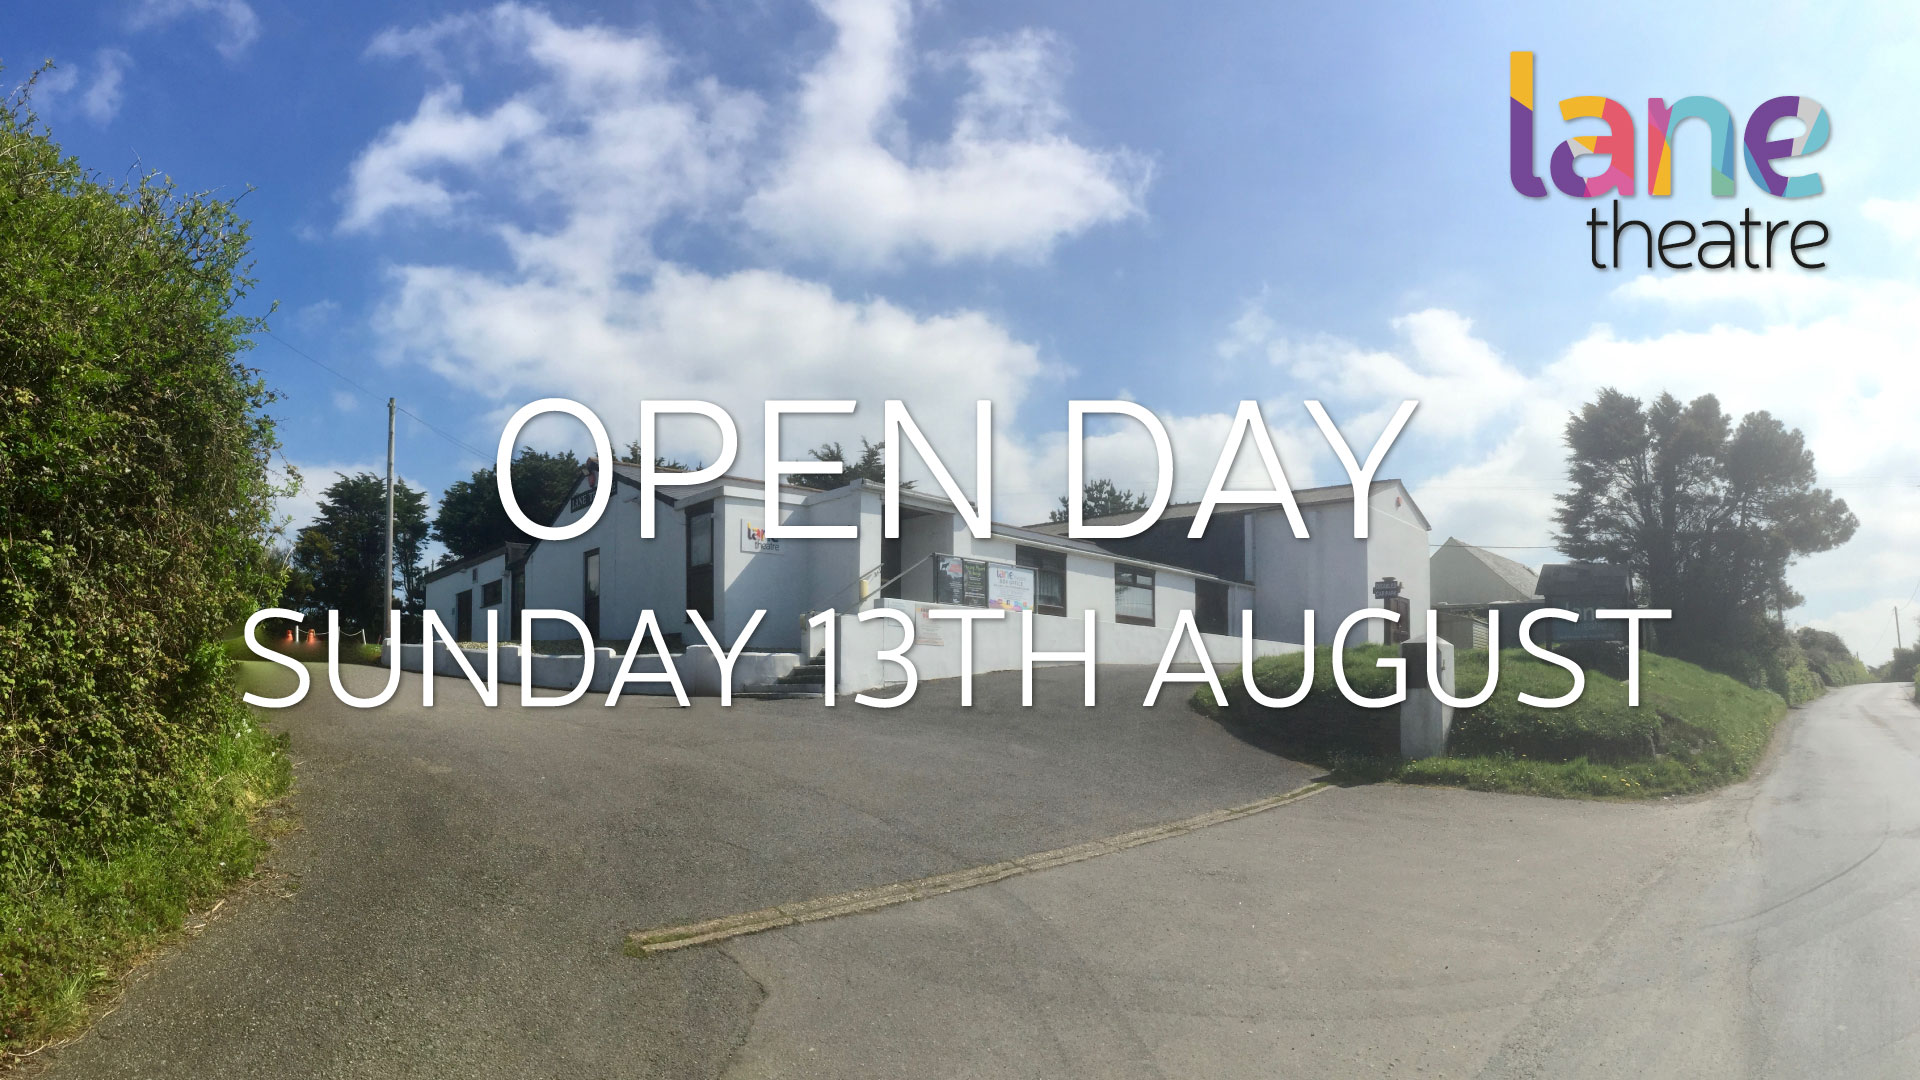 Lane Theatre are hosting an open day this Sunday 13th August to showcase the wonderful venue